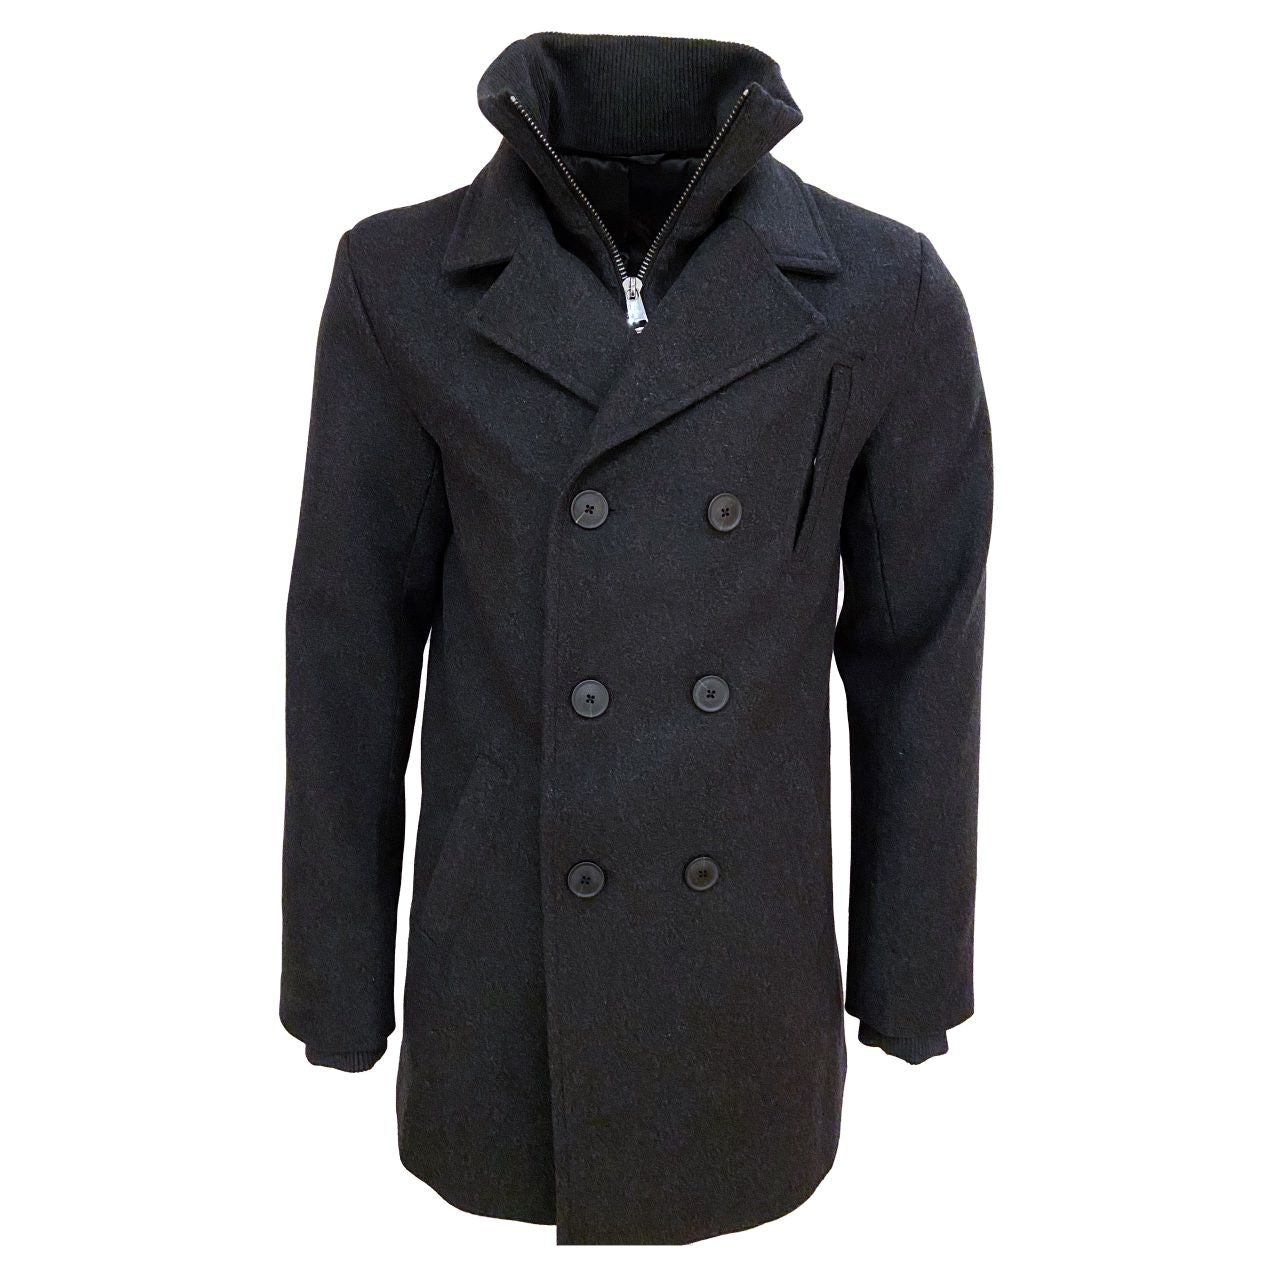 Wool and Cashmere Blend Double Breasted Button Coat with Zip-Out Wind Blocker in Charcoal by Viyella